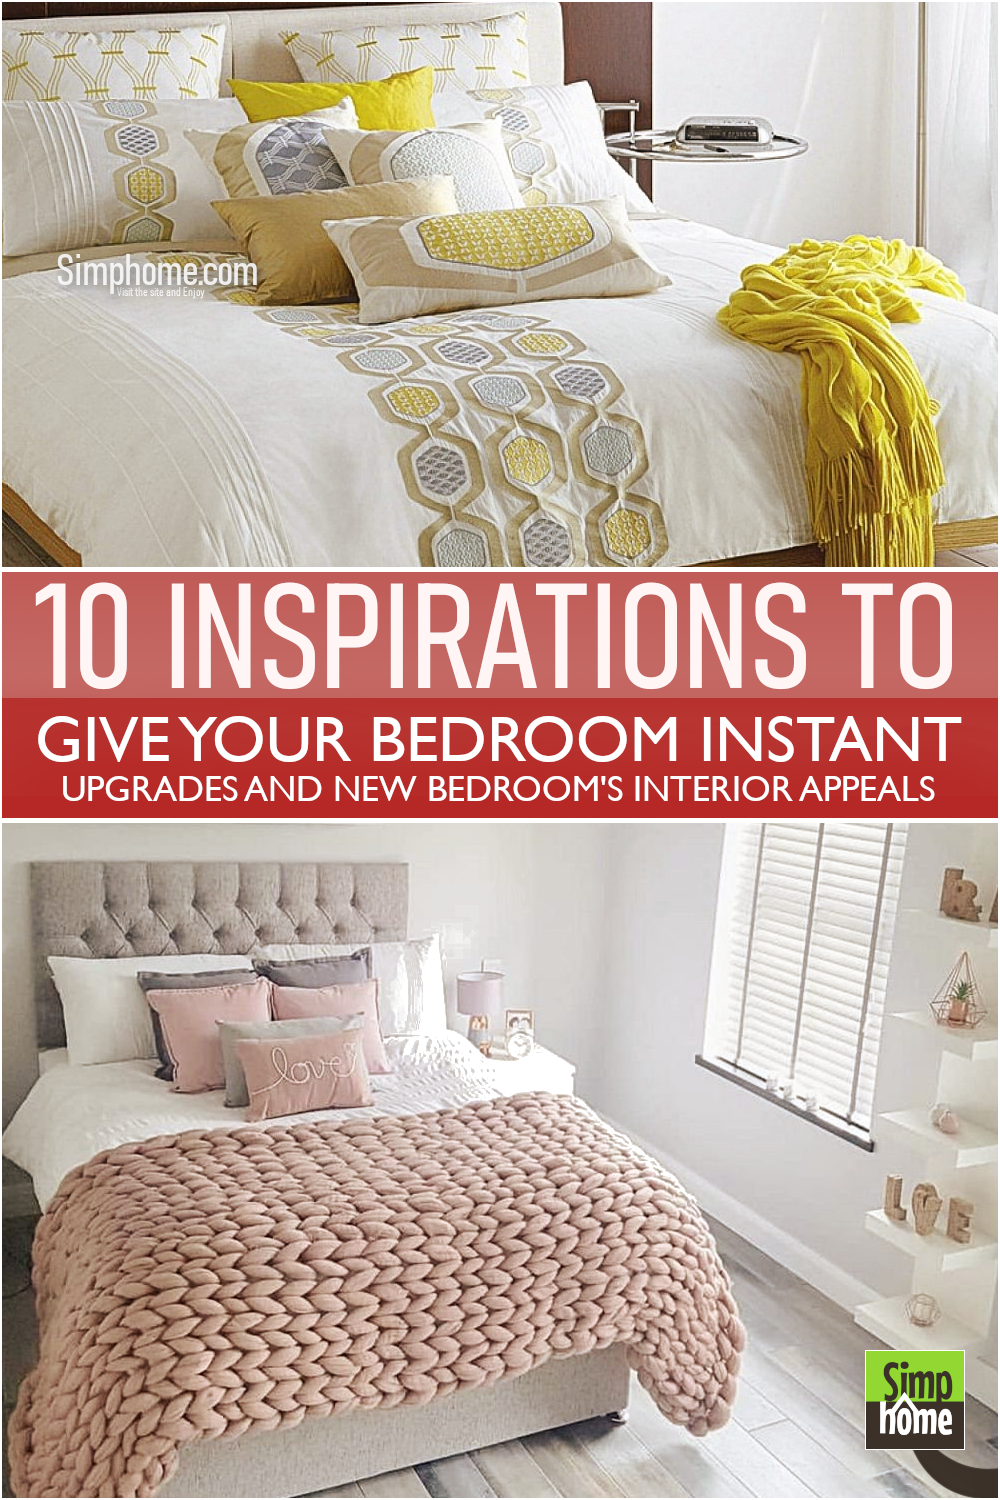 10 Inspirations to Give Your Bedroom Upgrade Poster via Simphome